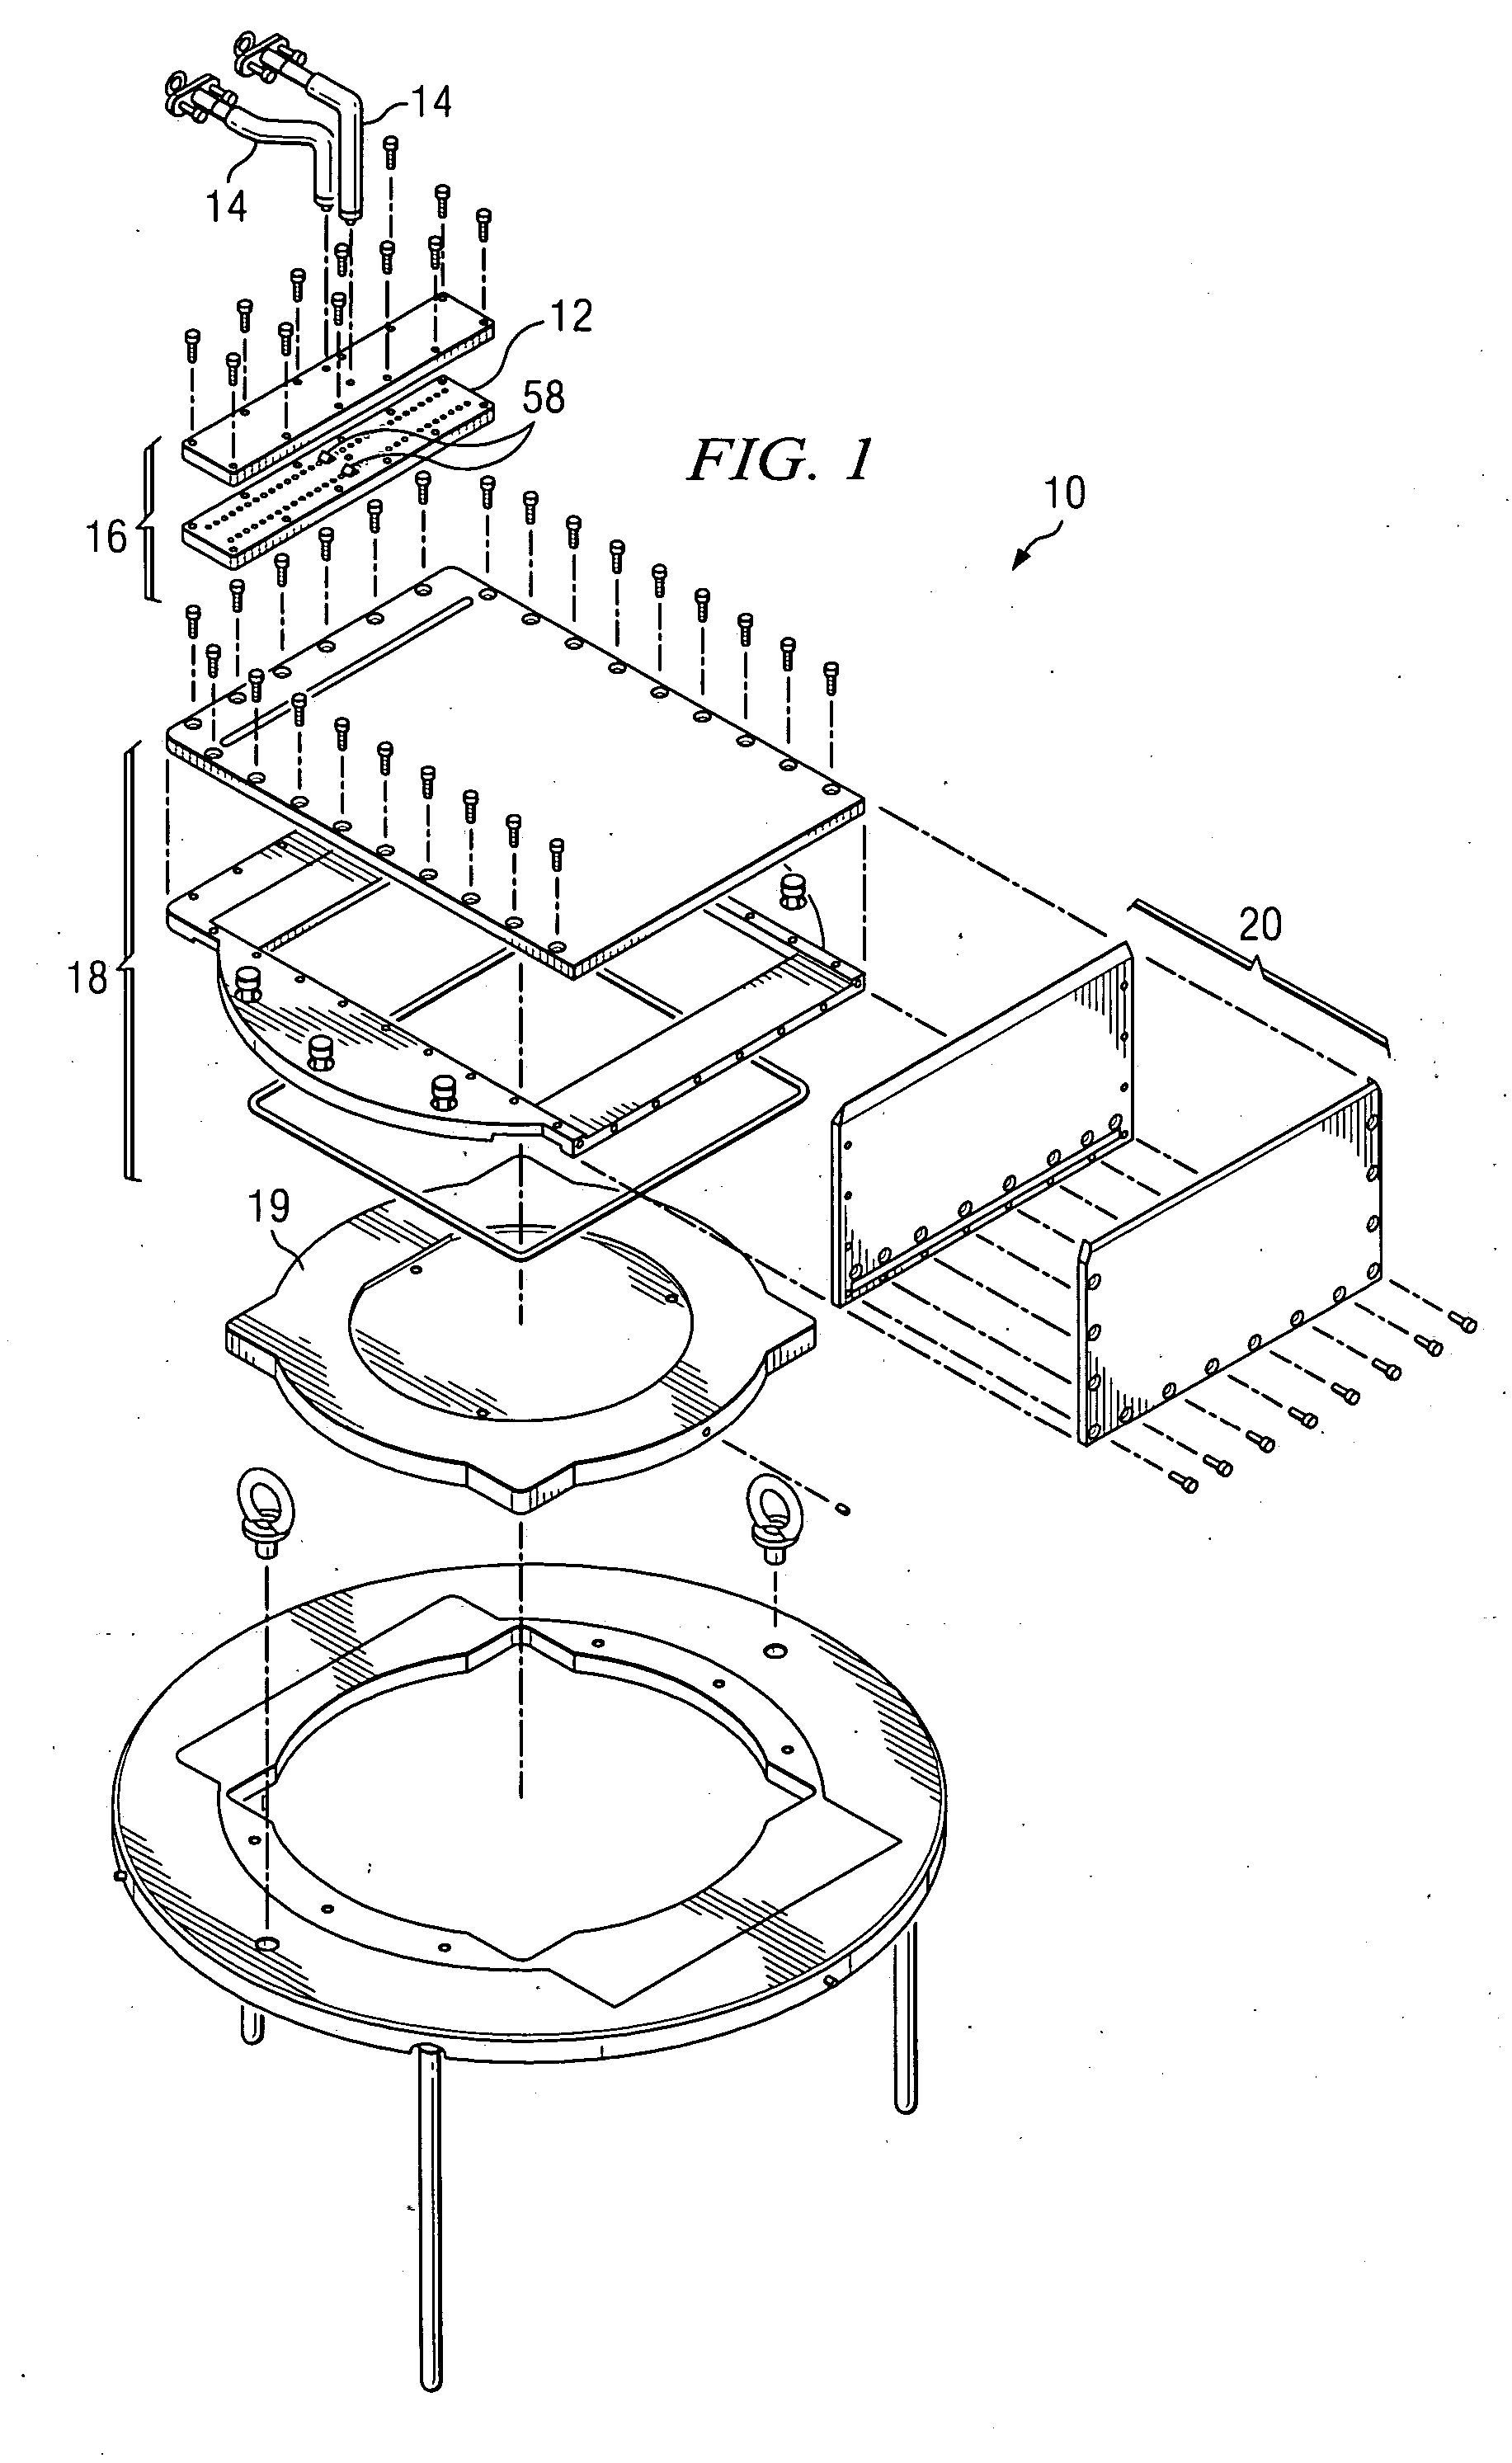 Method and apparatus for fabricating a conformal thin film on a substrate